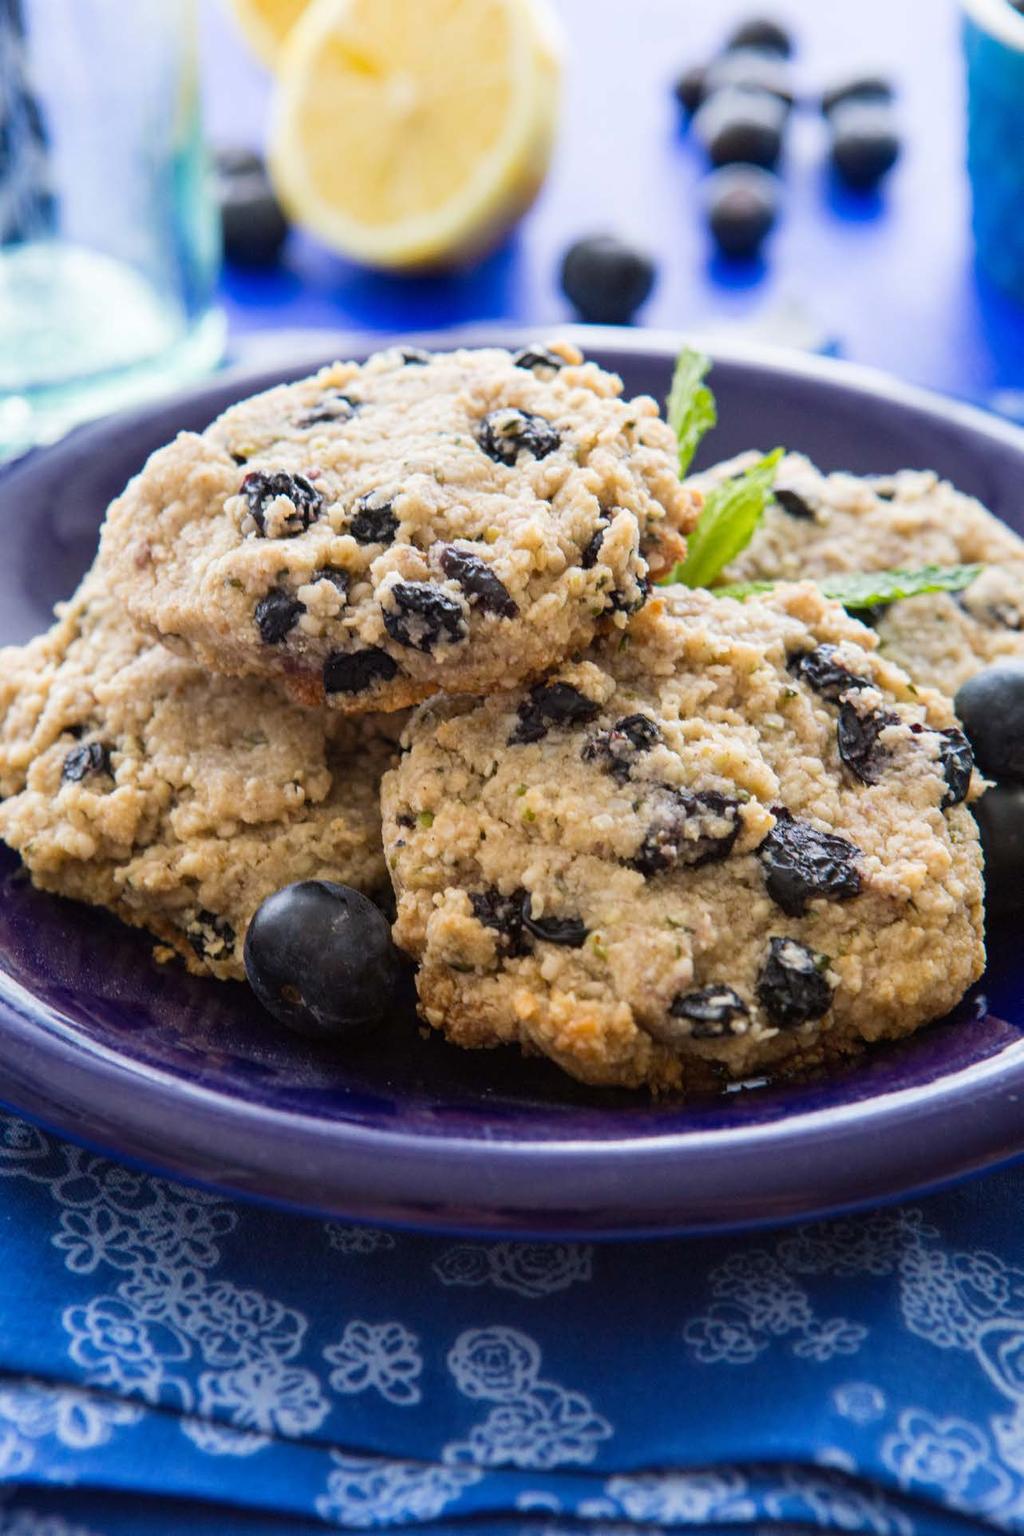 9. Protein Power Breakfast Cookies Ever wanted to start off breakfast with a cookie, instead of a proper meal? Now you can! These high protein cookies are chock full of plant power.